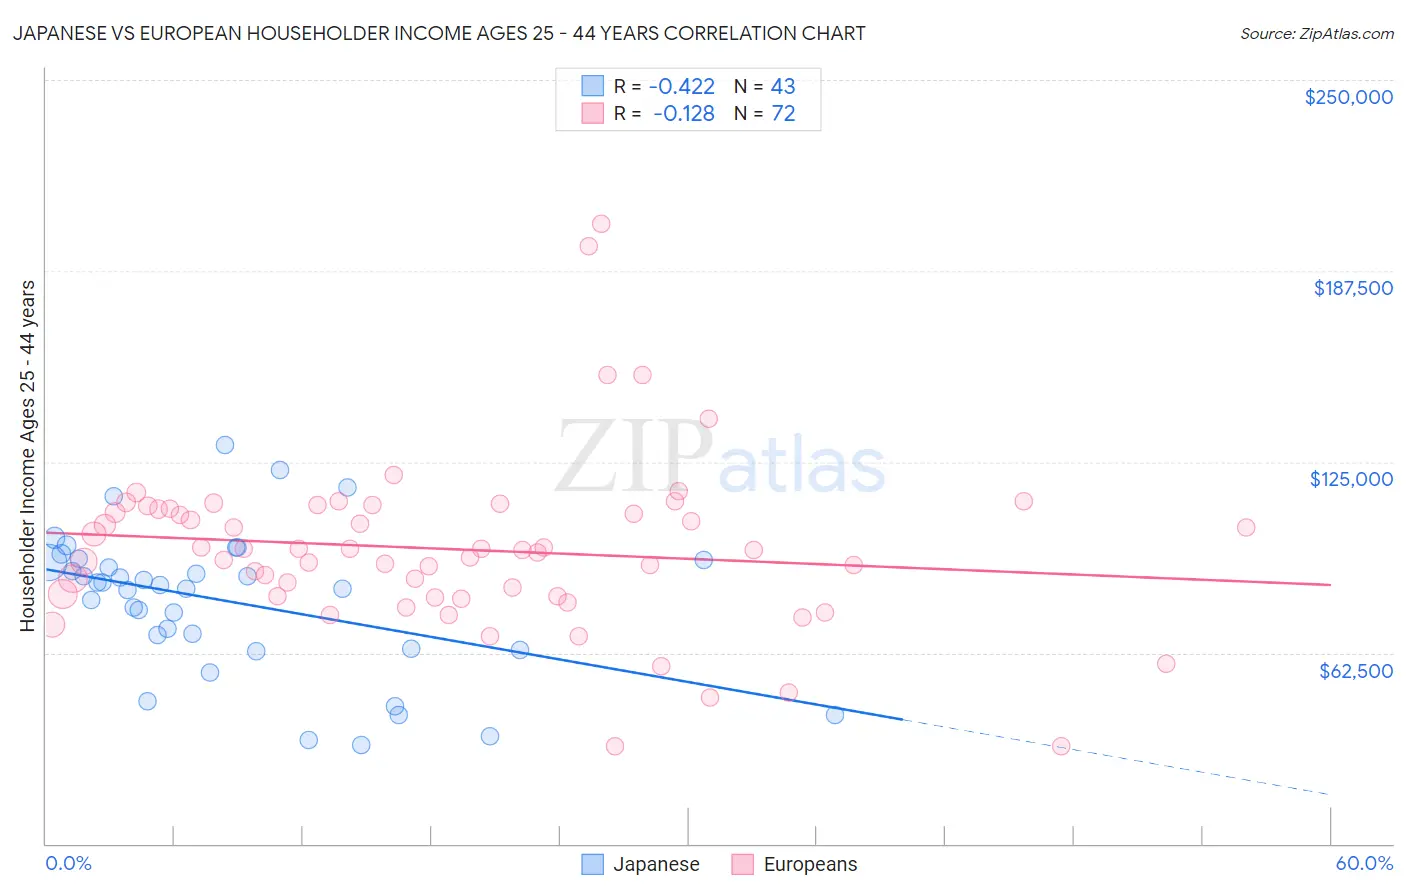 Japanese vs European Householder Income Ages 25 - 44 years